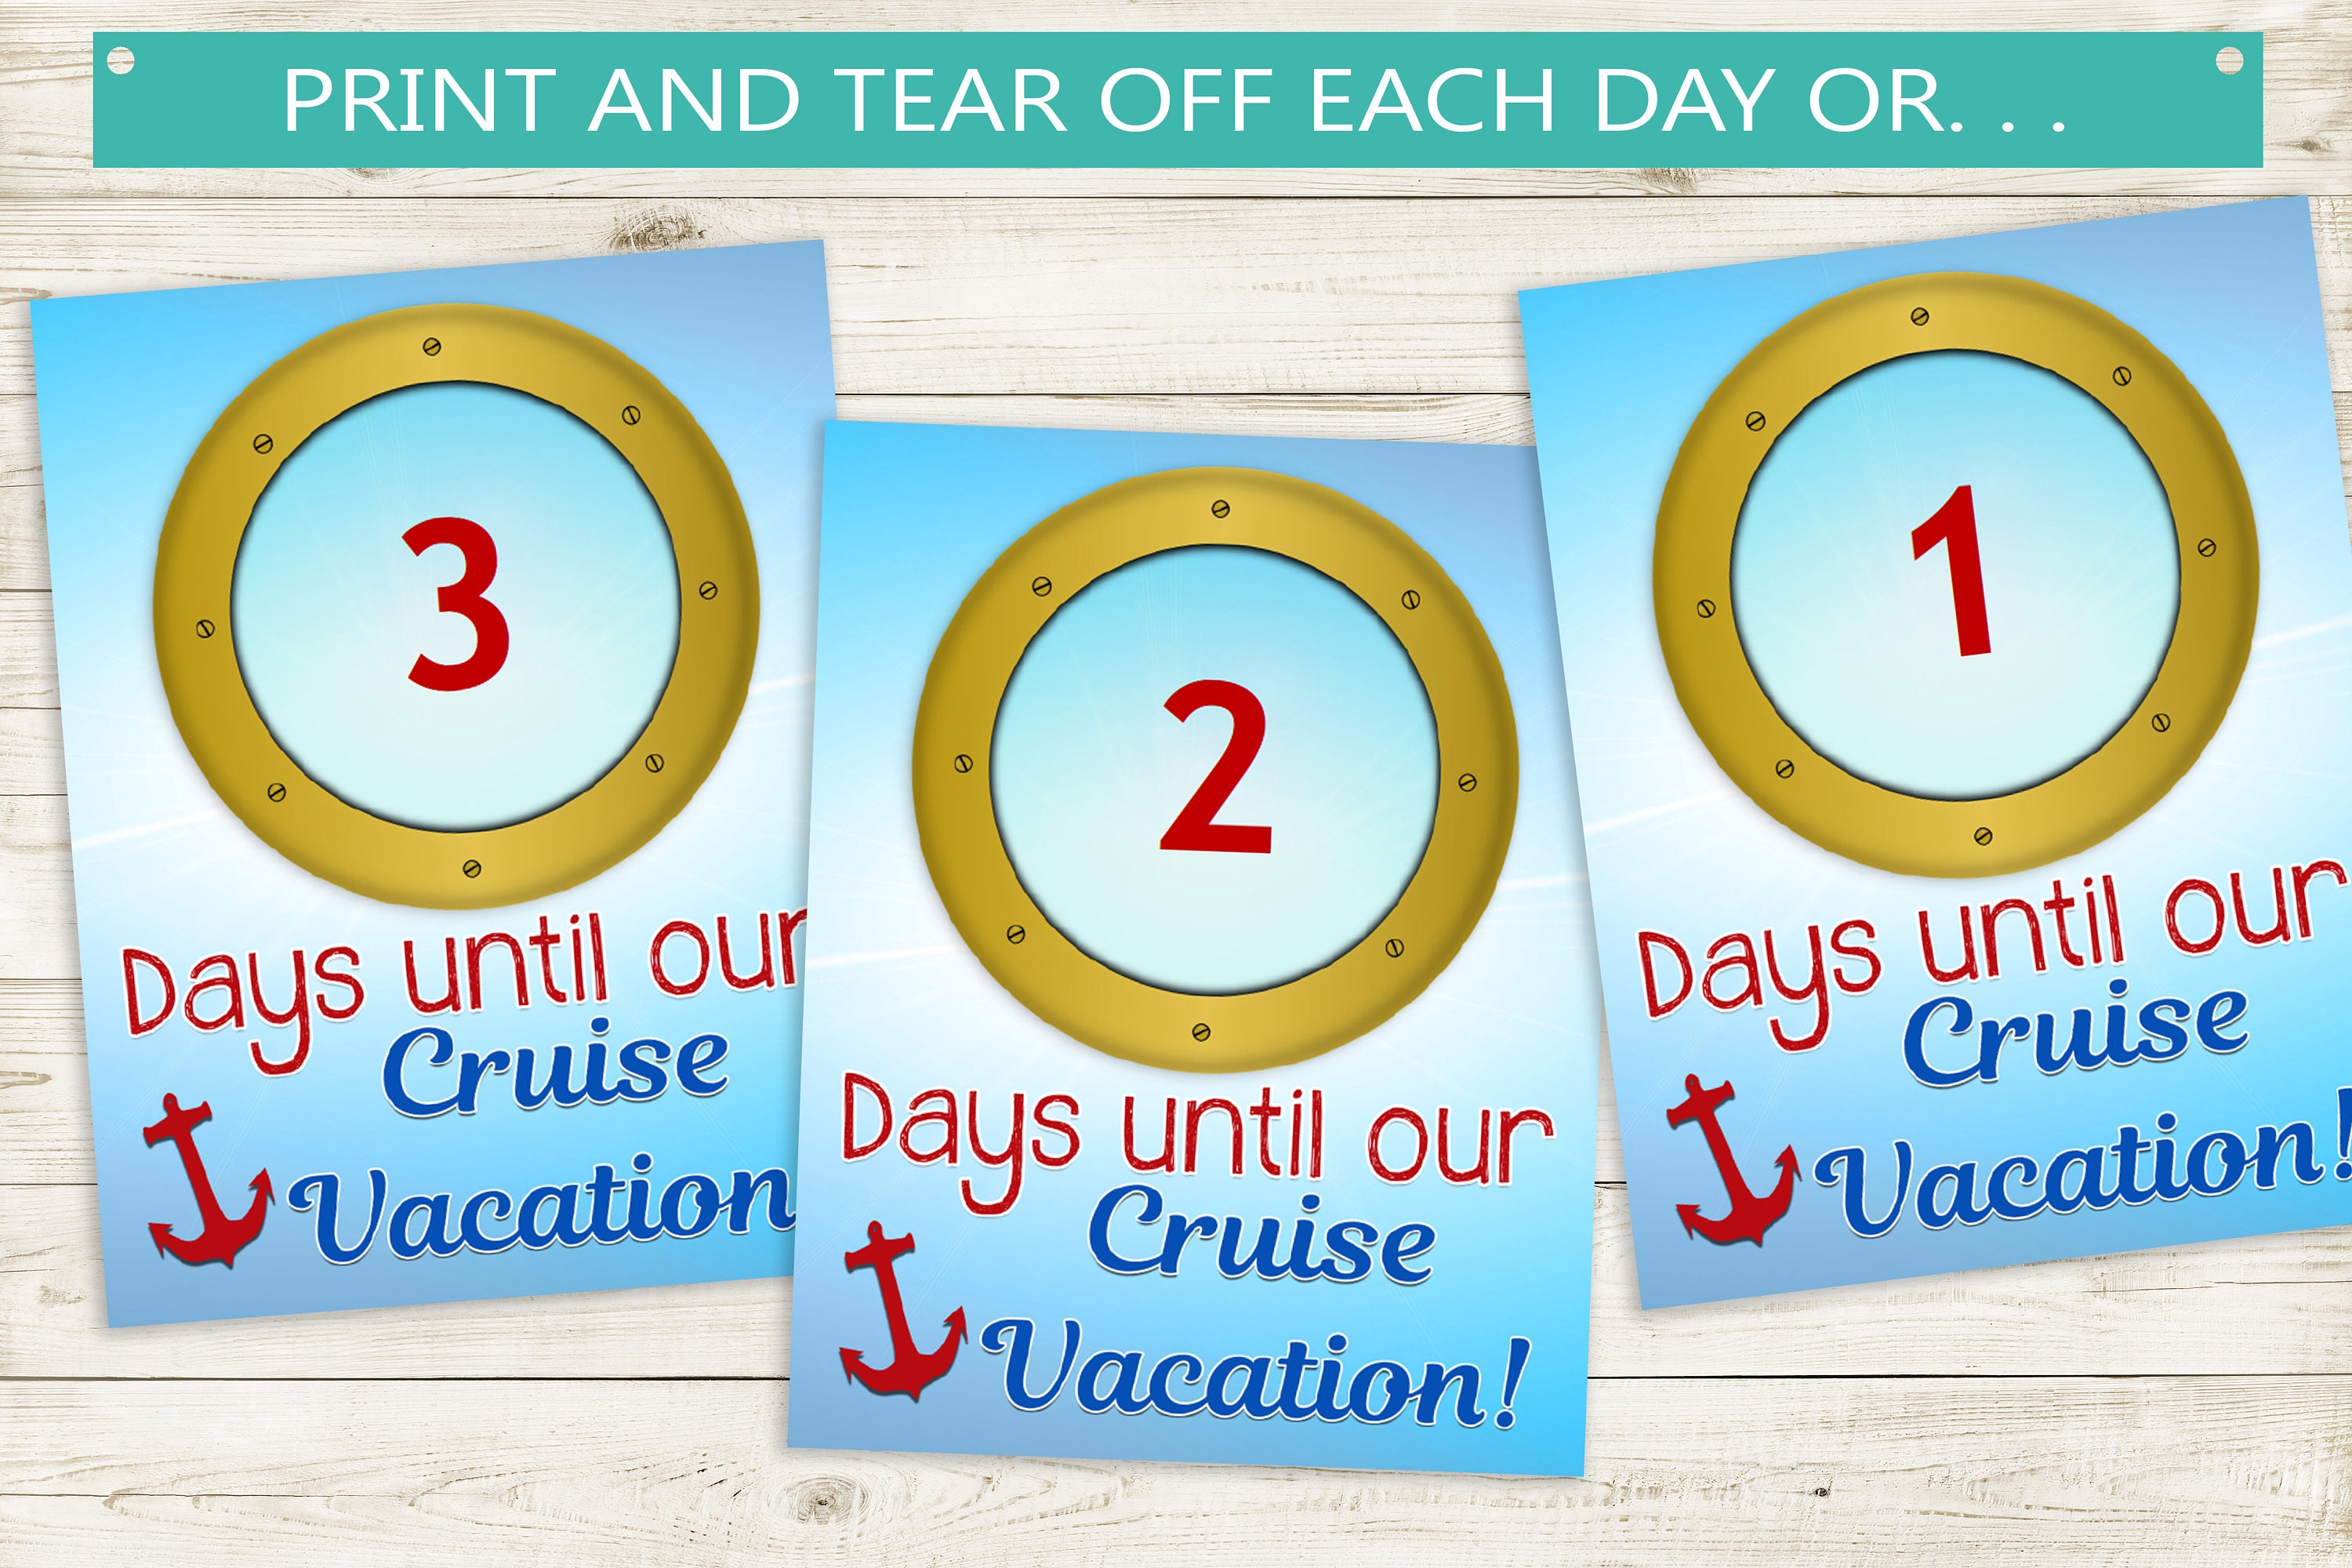 cruise vacation countdown